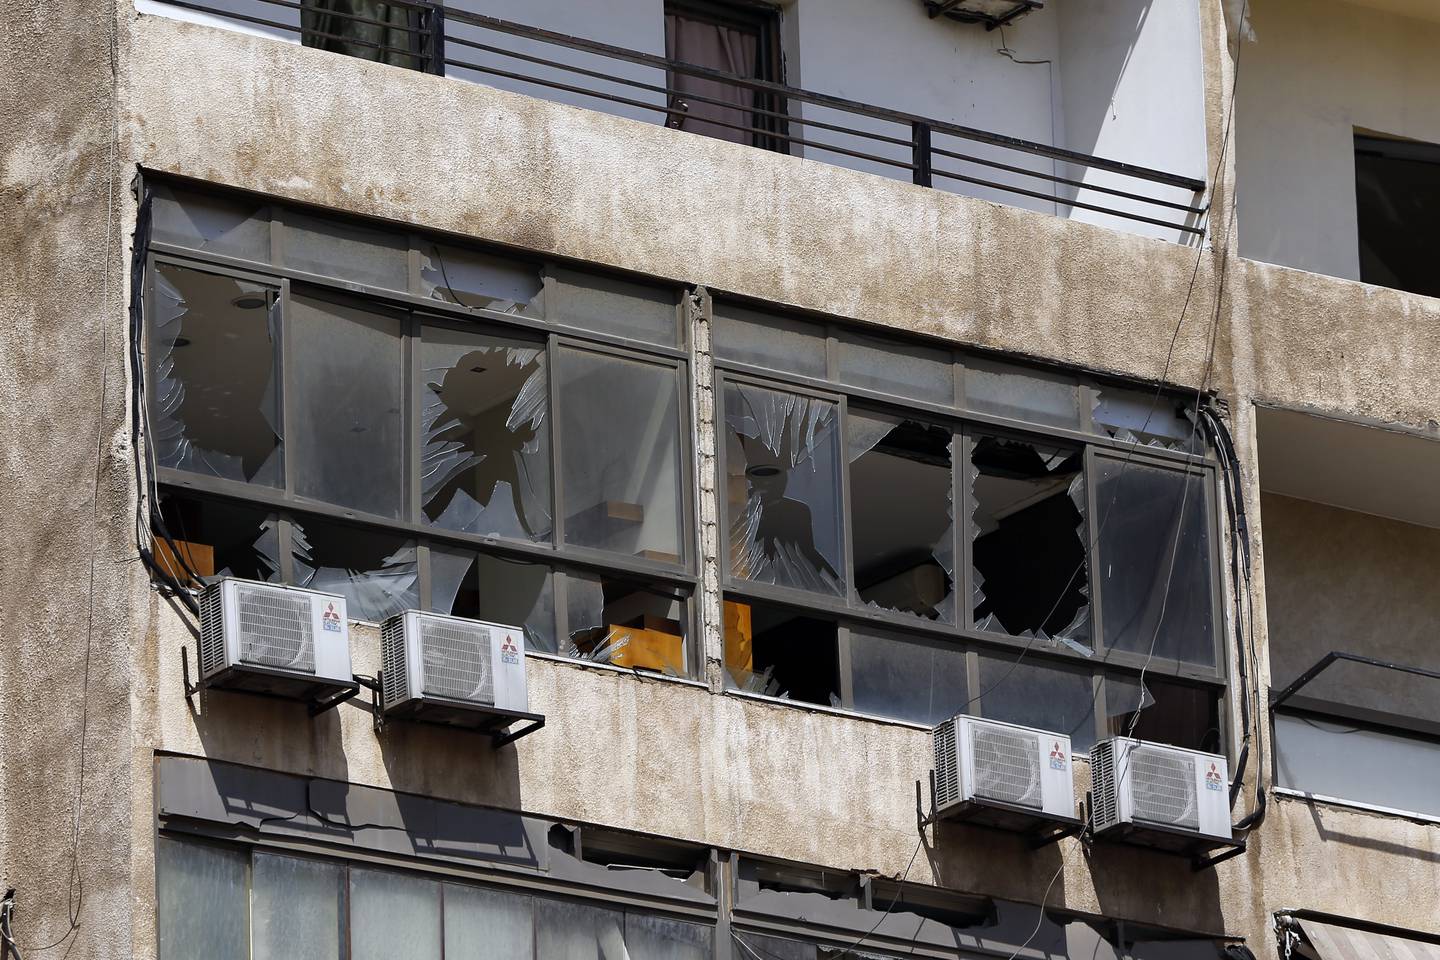 Broken windows are seen on the 11-floor building that houses the media office in a stronghold of the Lebanese Hezbollah group in a southern suburb of Beirut, Lebanon, Sunday, Aug. 25, 2019.